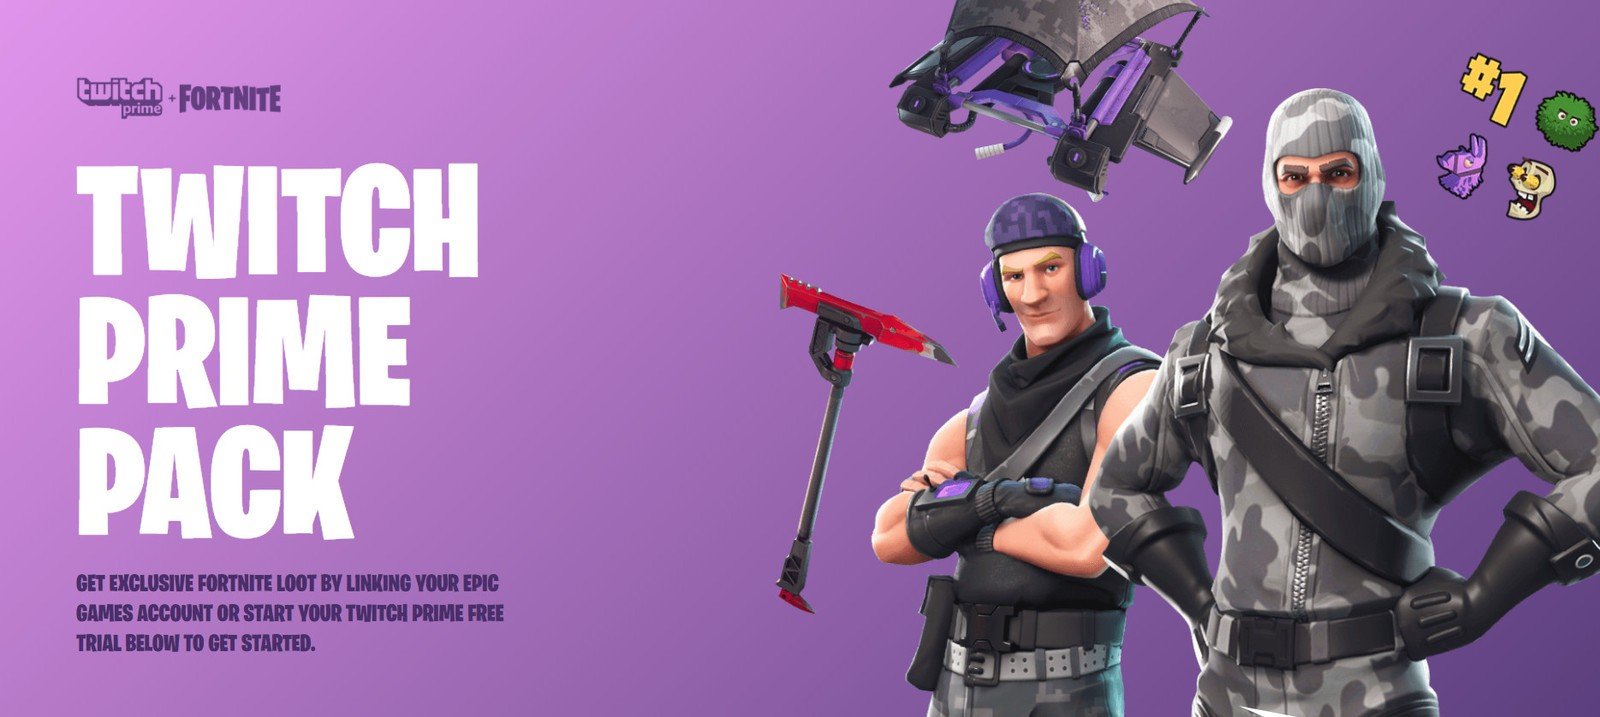 Fortnite Twitch Prime Pack - PC PS4 XBOX One